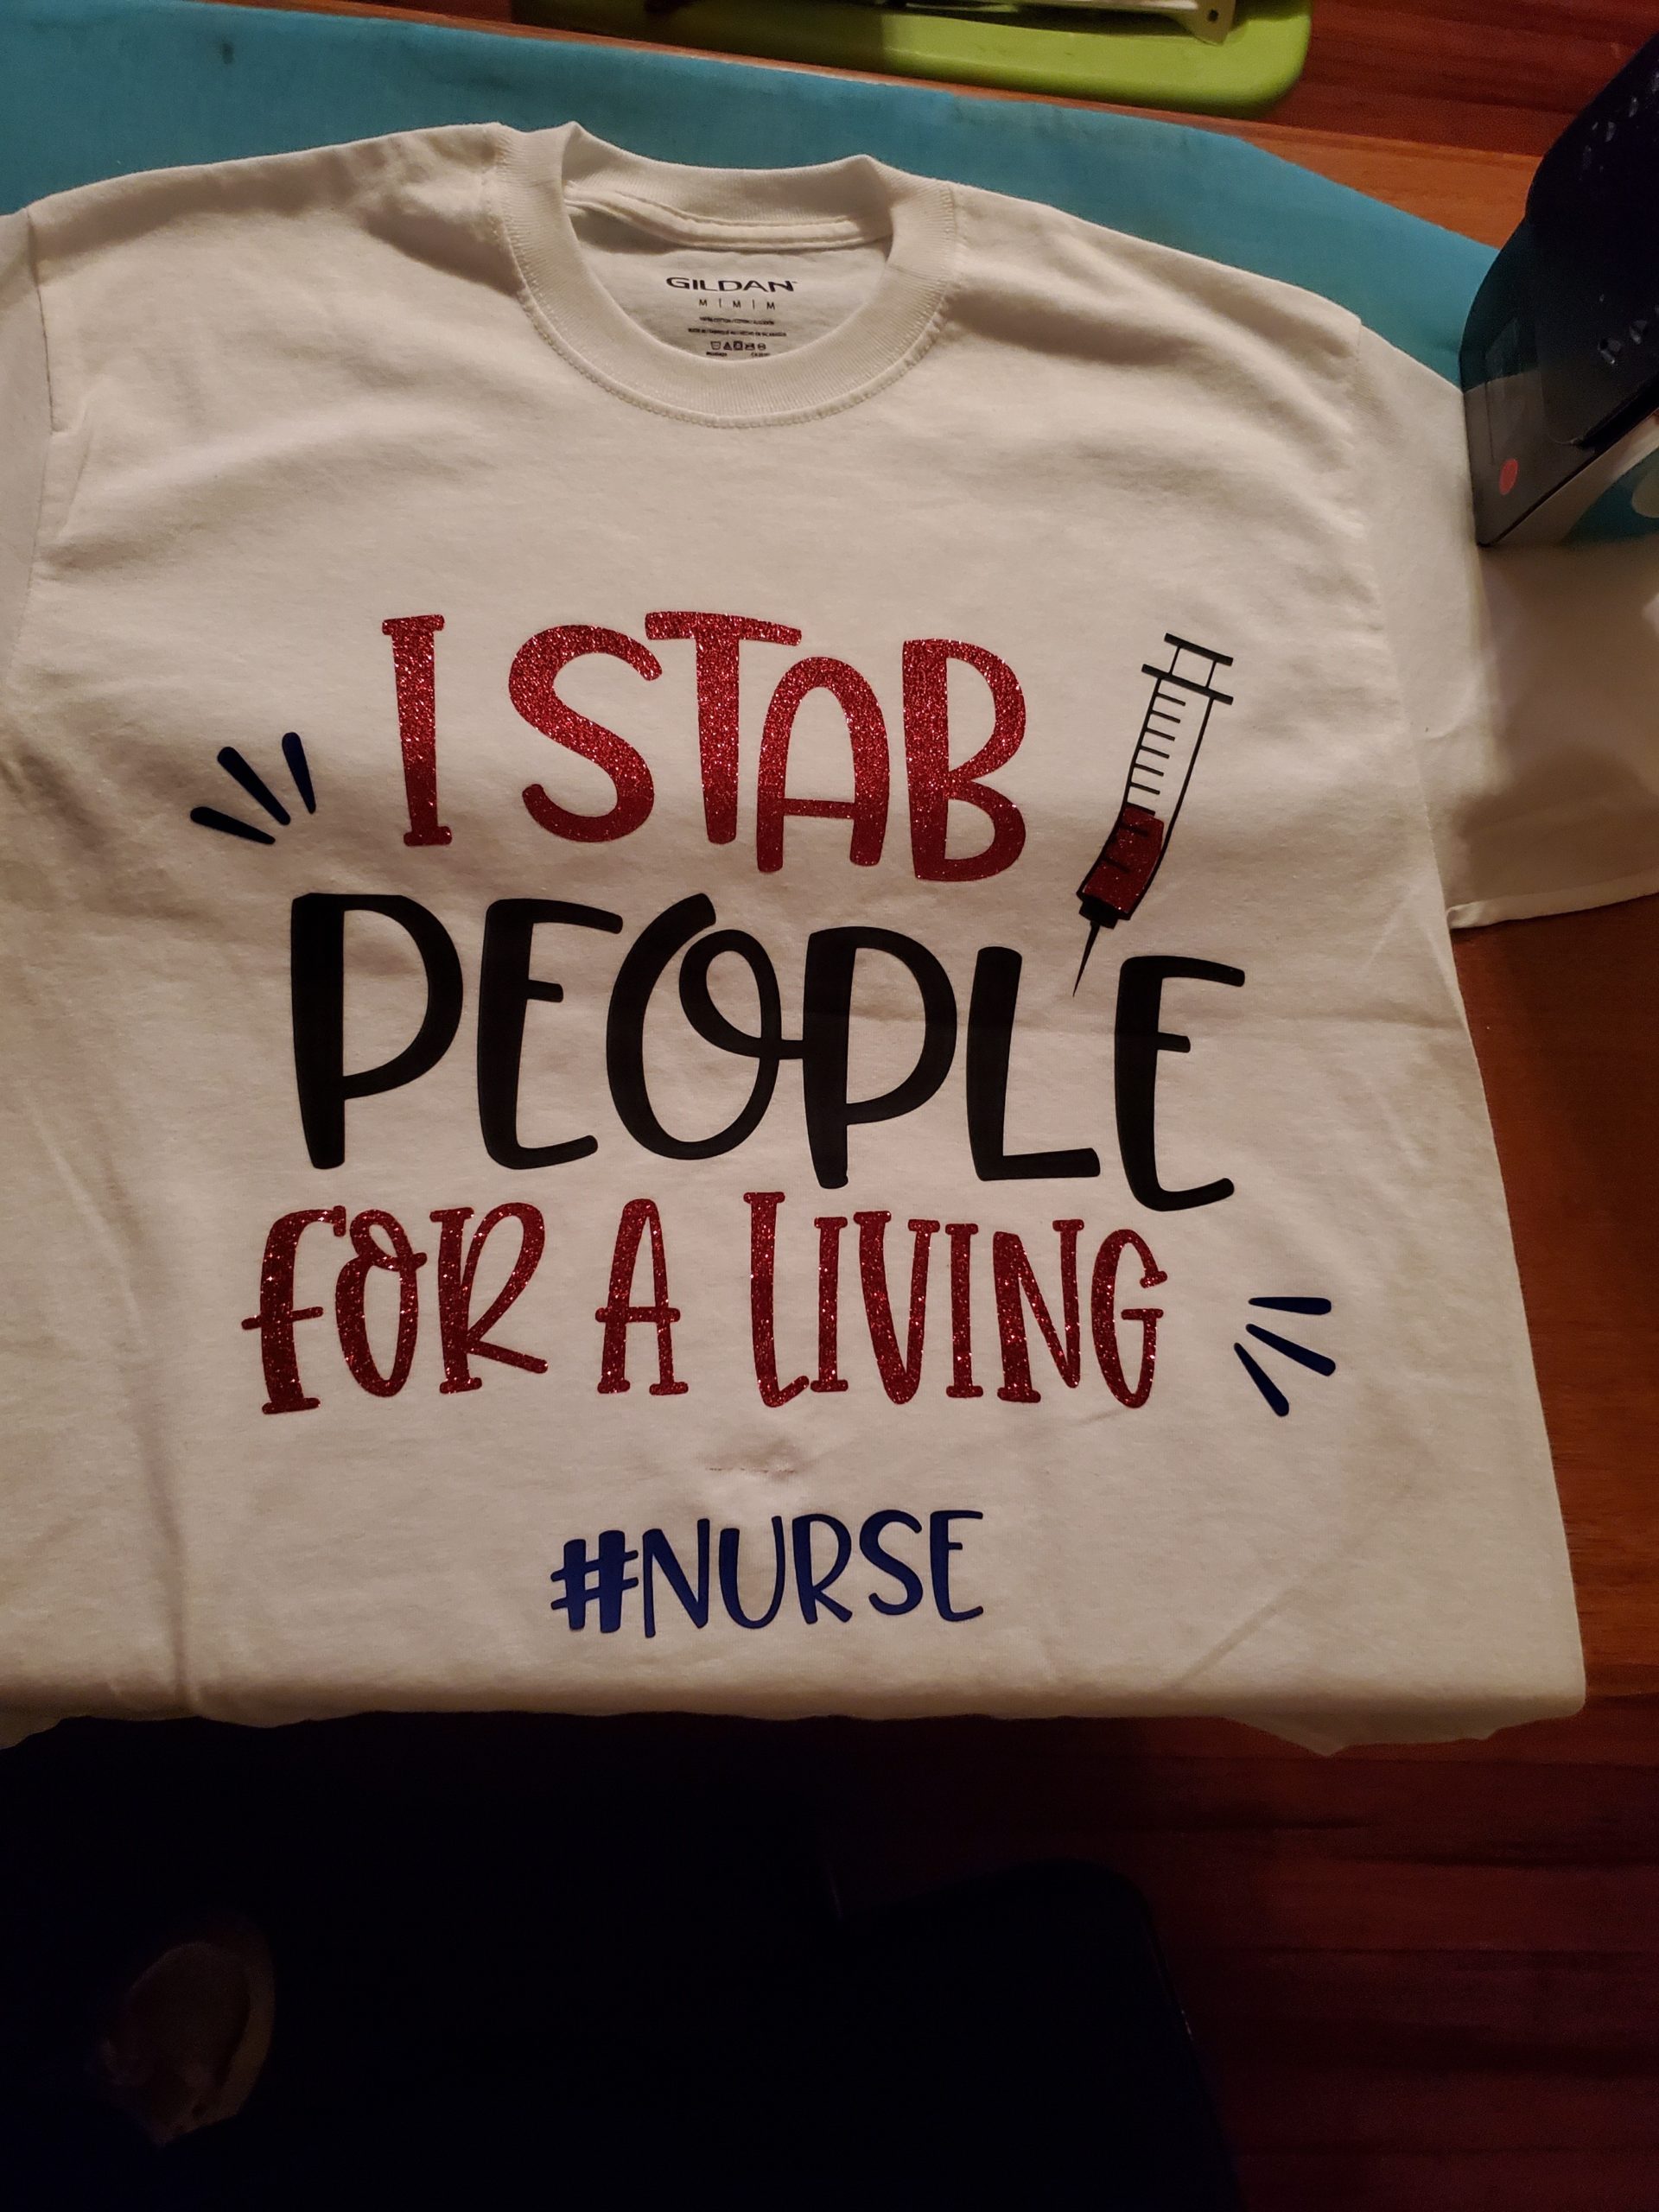 Nurse- I stab people for a living